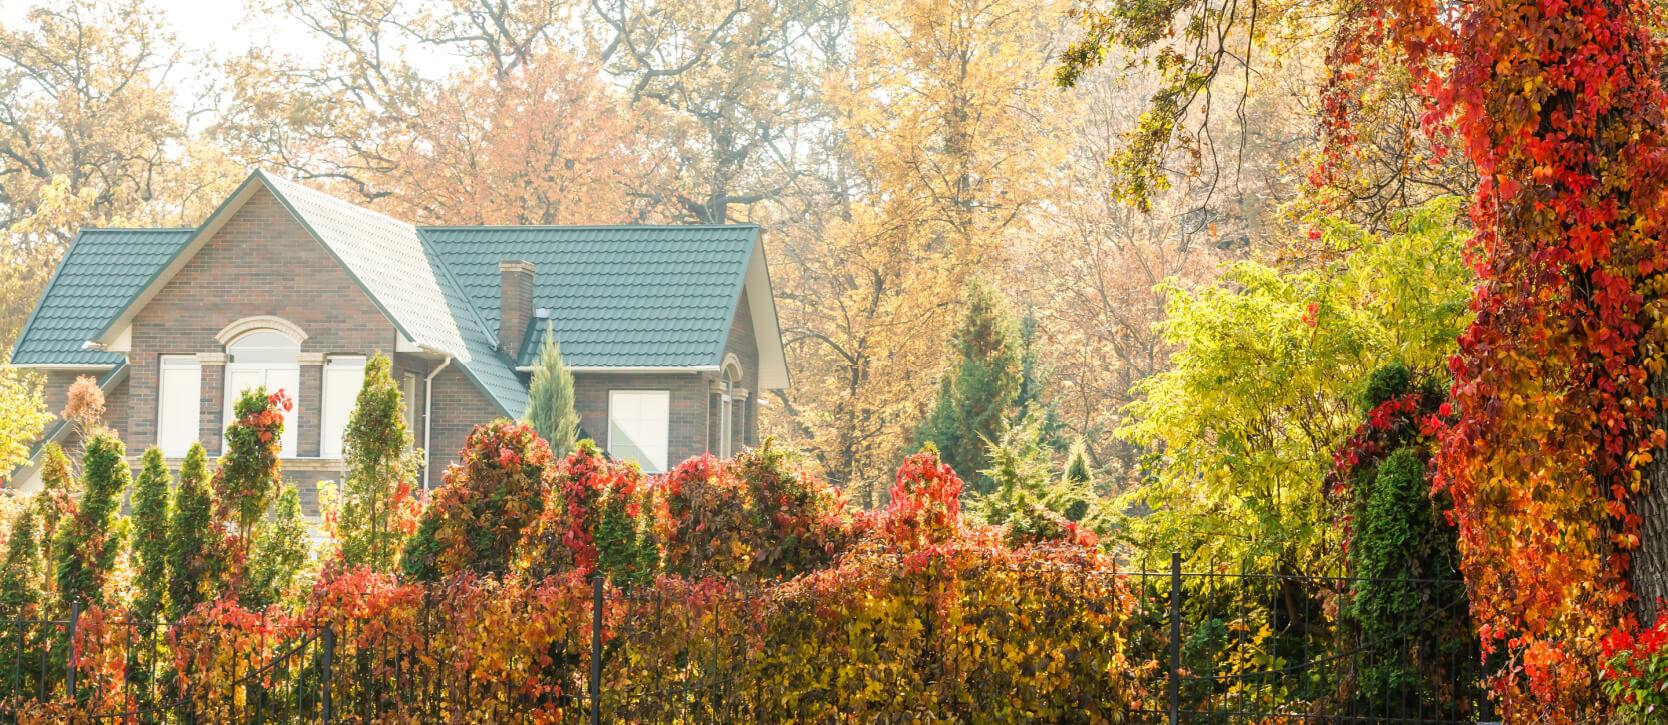 Residential home in the fall in Oklahoma